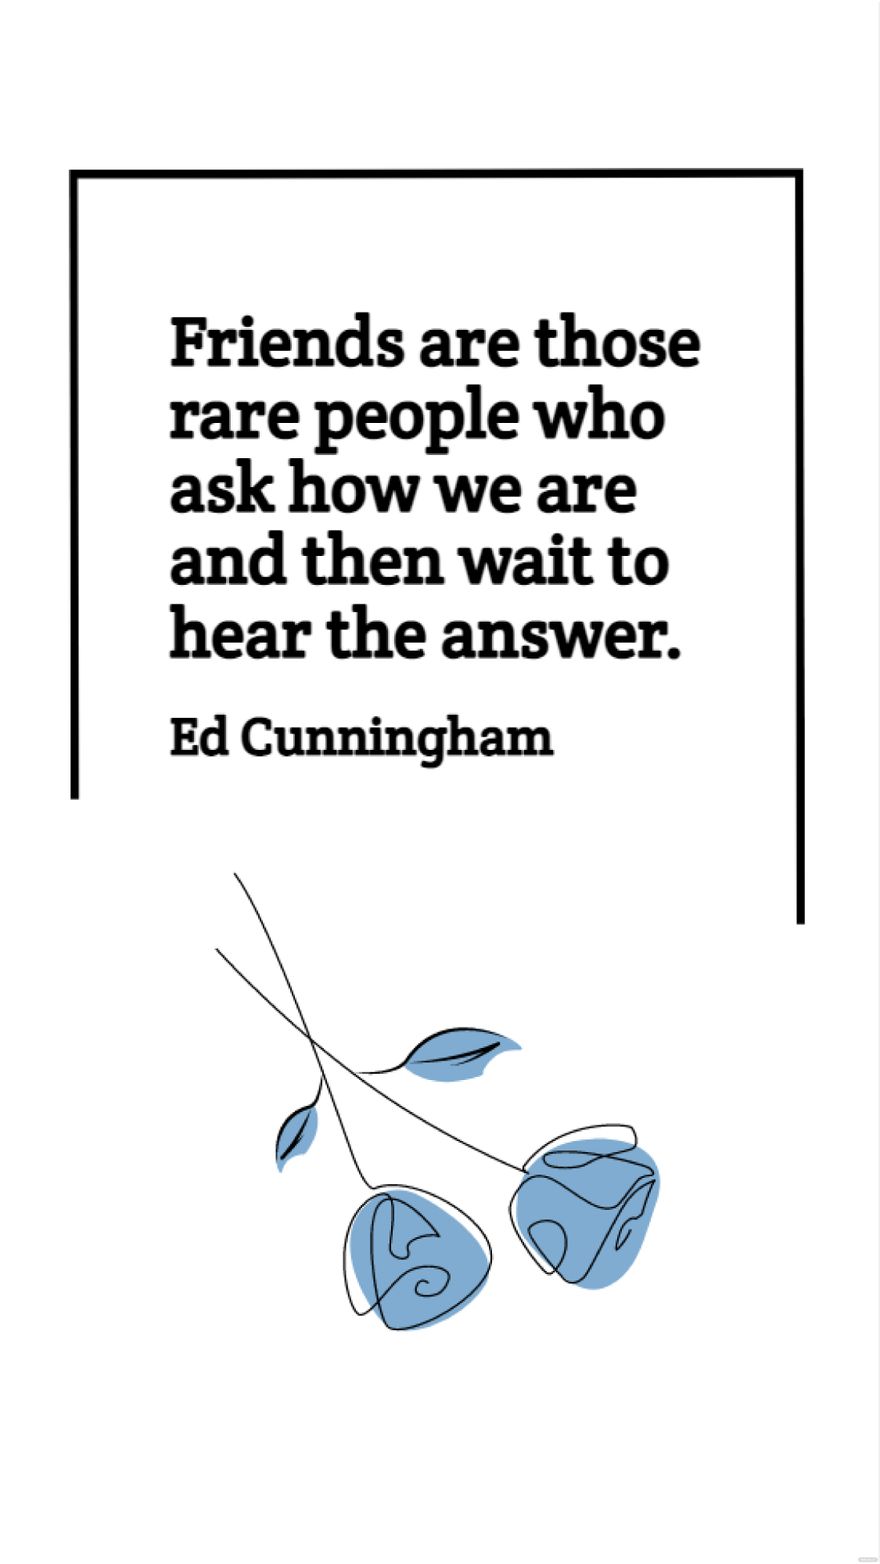 Free Ed Cunningham - Friends are those rare people who ask how we are and then wait to hear the answer.